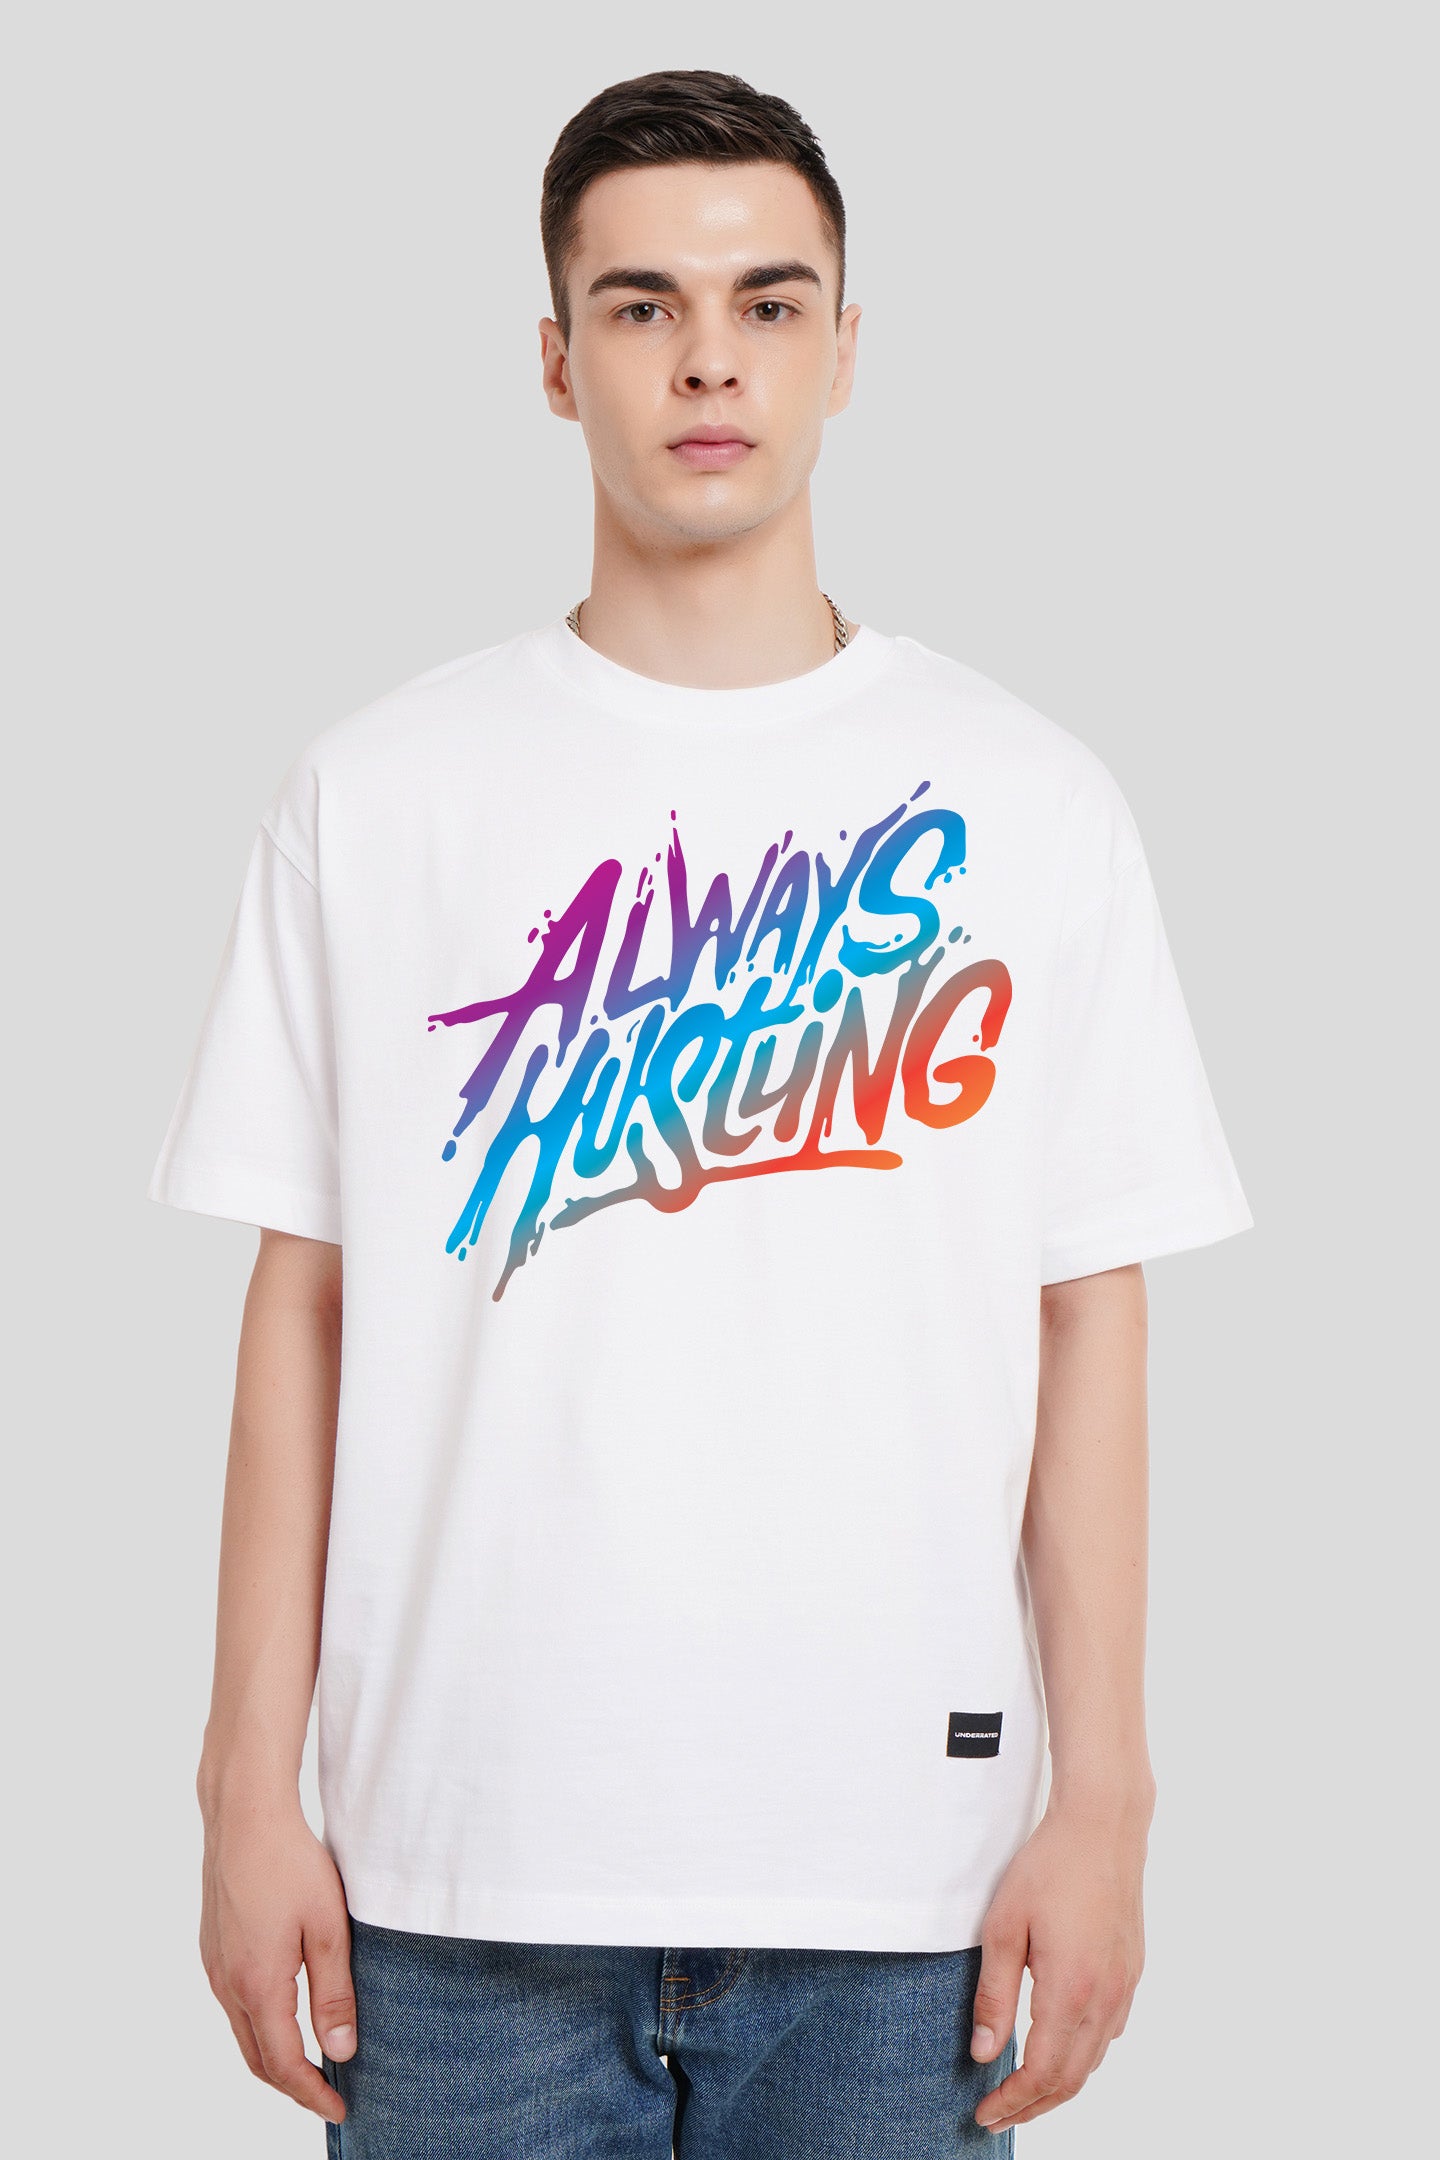 Always Hustling White Printed T Shirt Men Oversized Fit With Front Design Pic 1